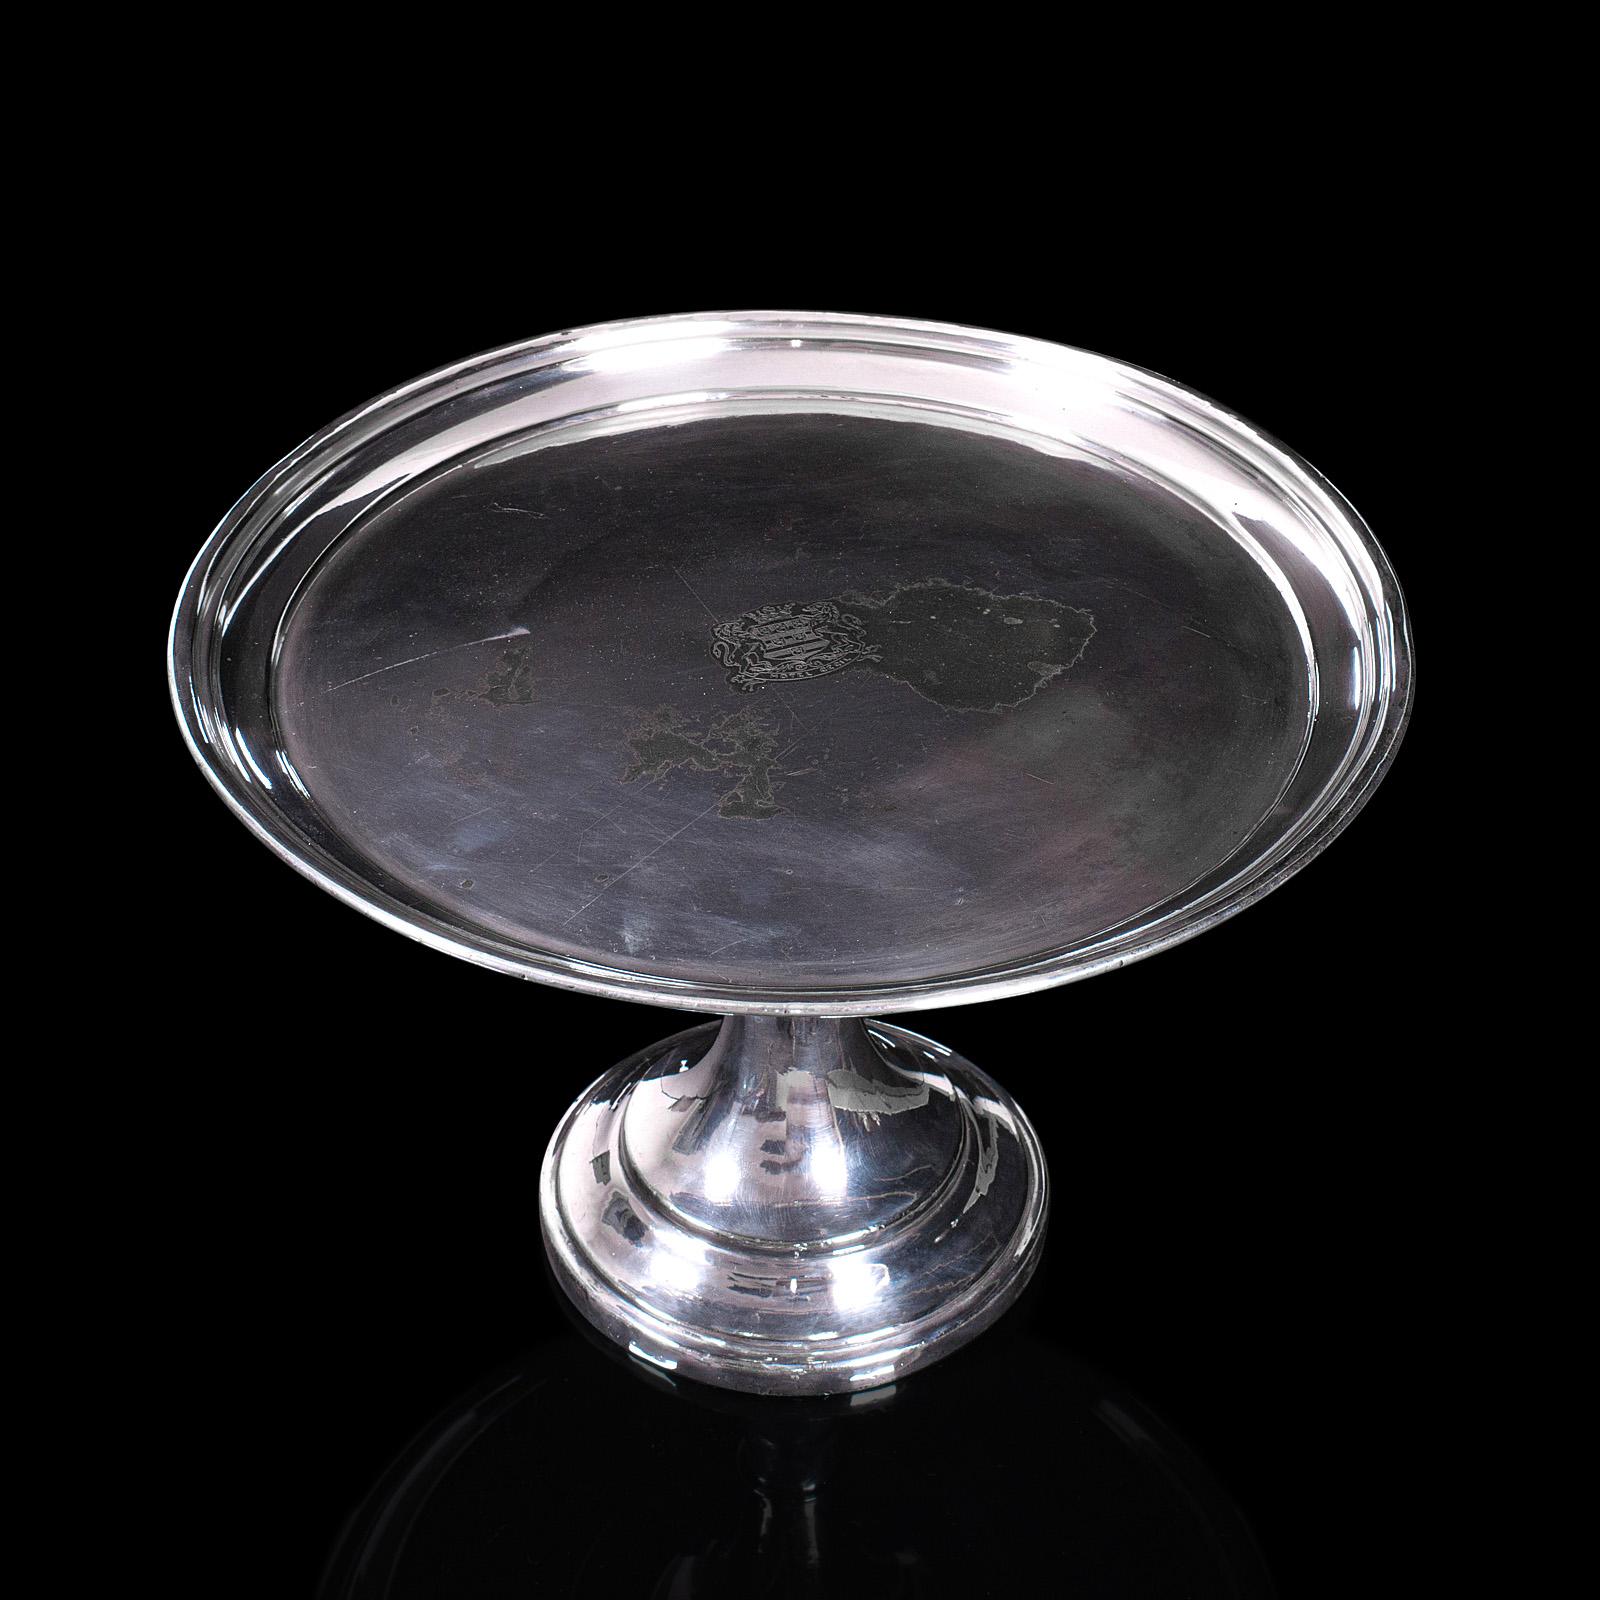 This is an antique cake stand. An English, silver plated serving dish with engraved Cecil Hotel, London emblem, dating to the late Victorian period, circa 1900.

Elegant cake stand ideal for special occasions
Displays a desirable aged patina with